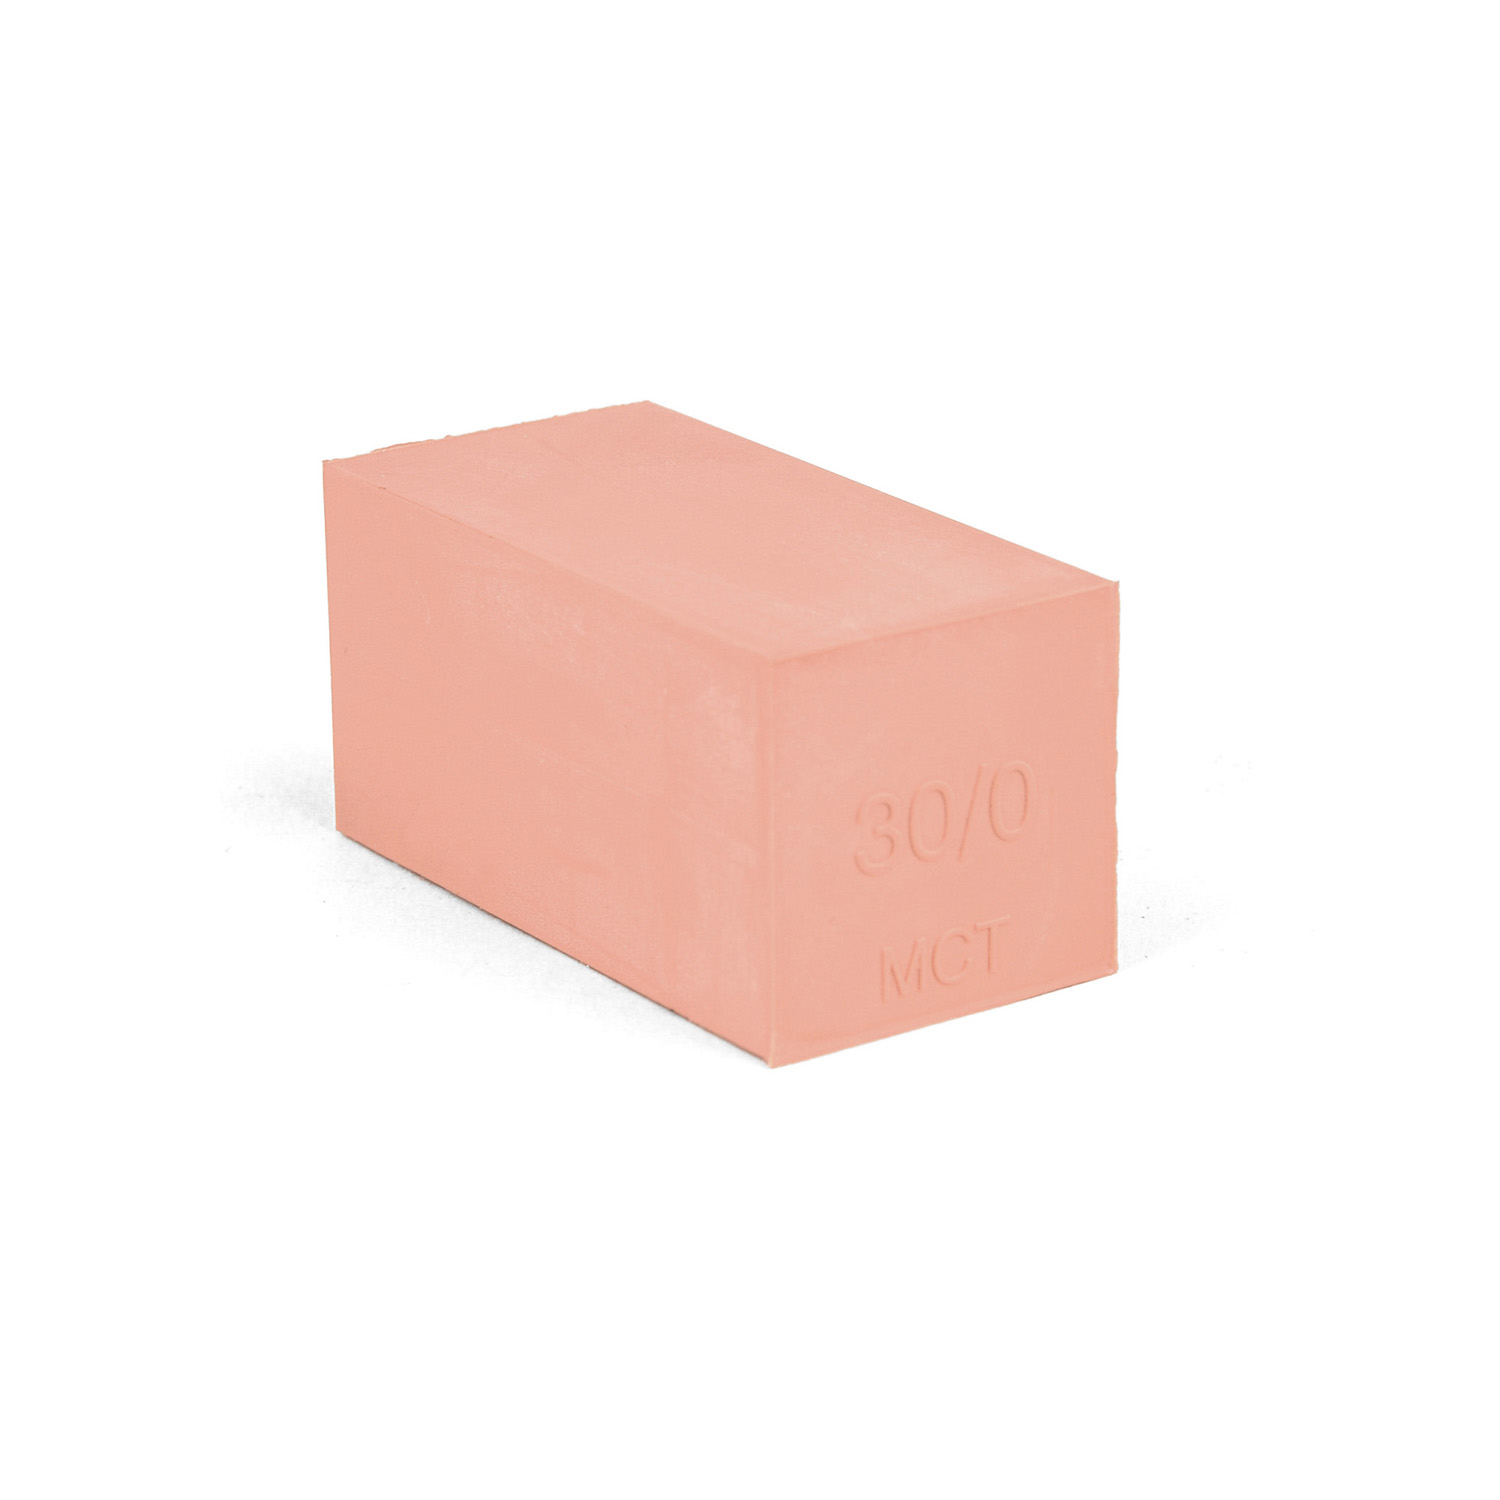 30-0 Spare block lycron, 30-0 solid block size 30x30mm